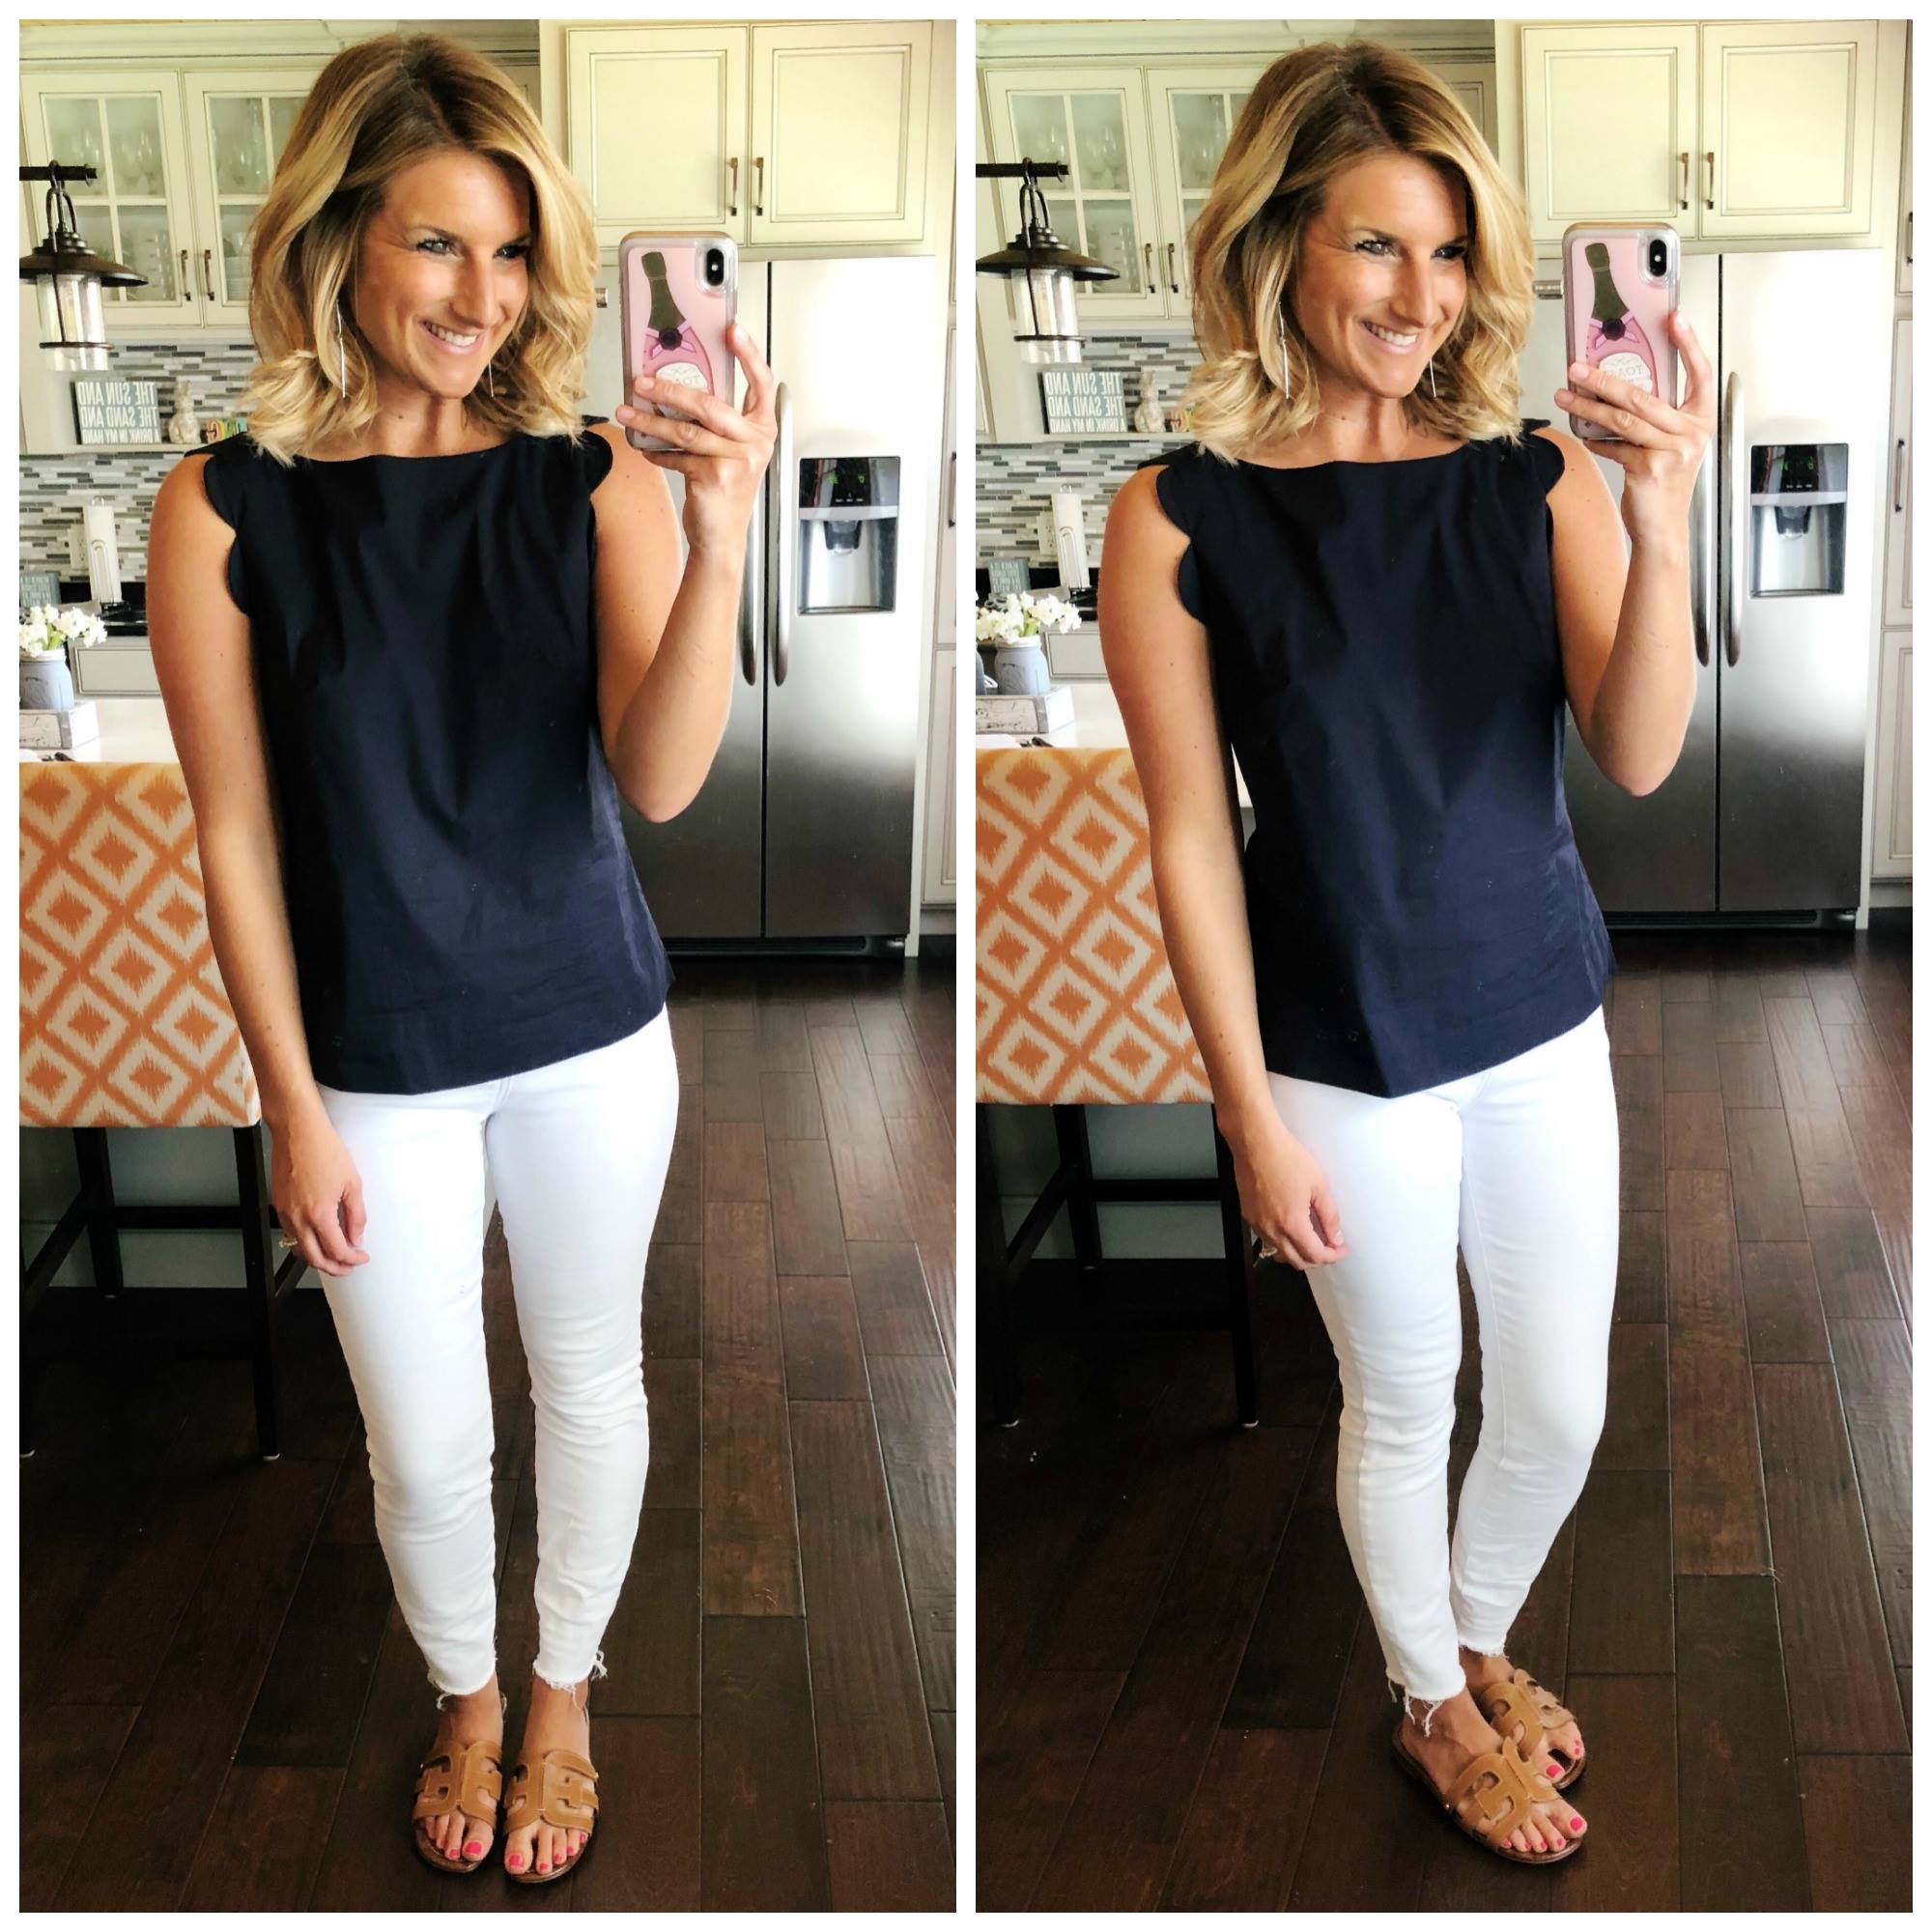 Work to Play Outfit // Work Outfit Inspiration // Scalloped Tank with non sheer white jeans and slide sandals